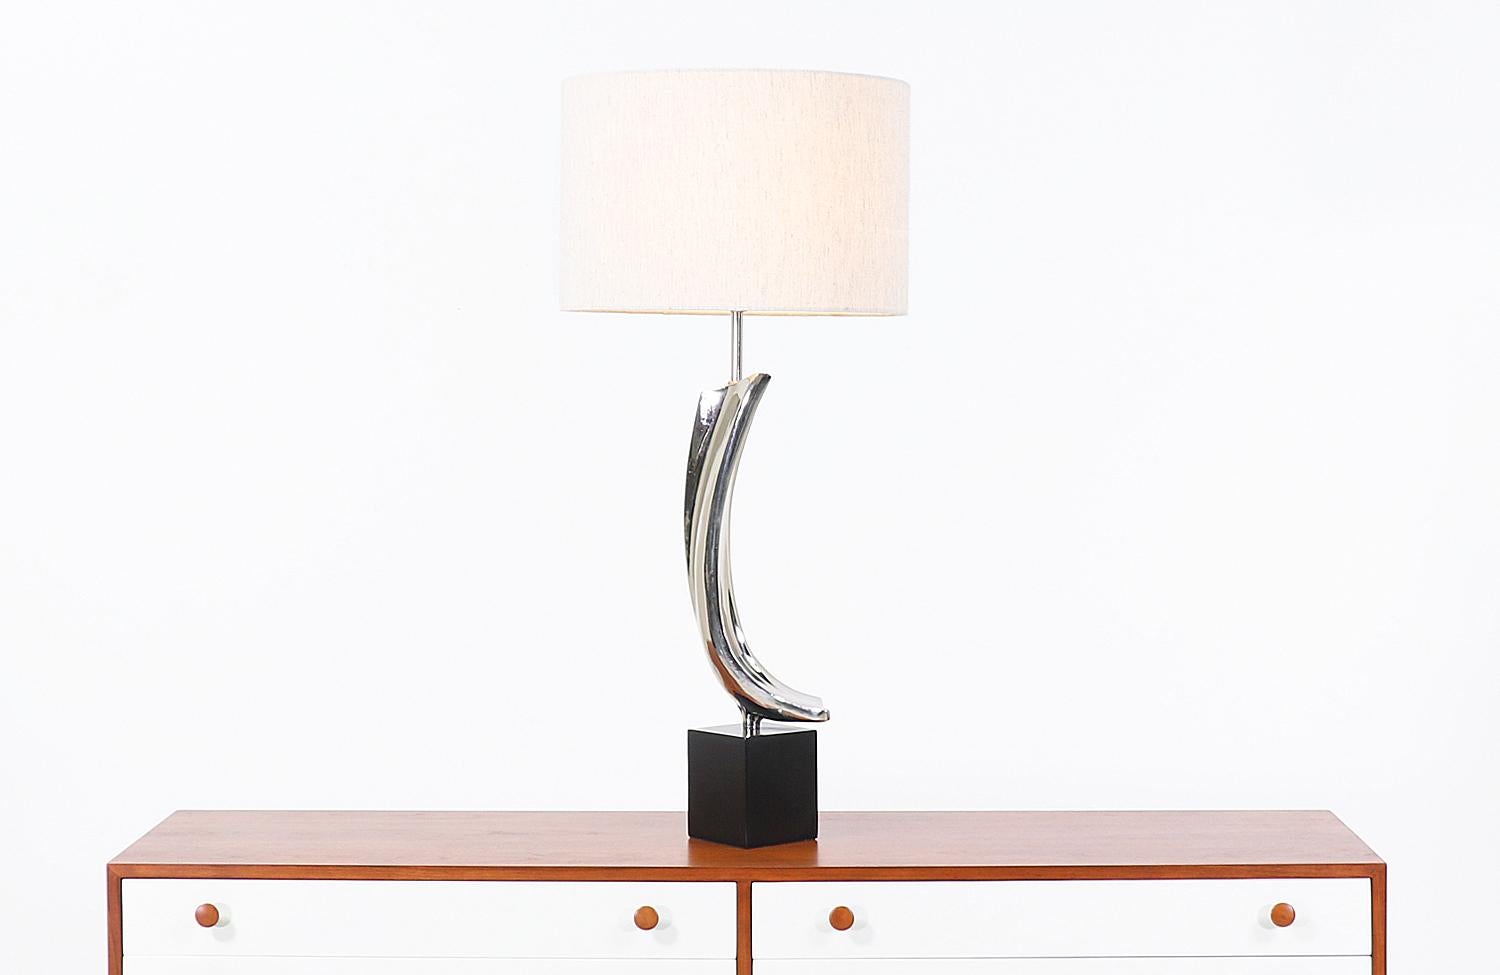 Modern table lamp designed by Richard Barr and Harold Weiss for Laurel Lamp Co. in the United States, circa 1960s. This unique table lamp features a swooping sculptural nickel-plated chrome body that sits on a rectangular black metal base exhibiting